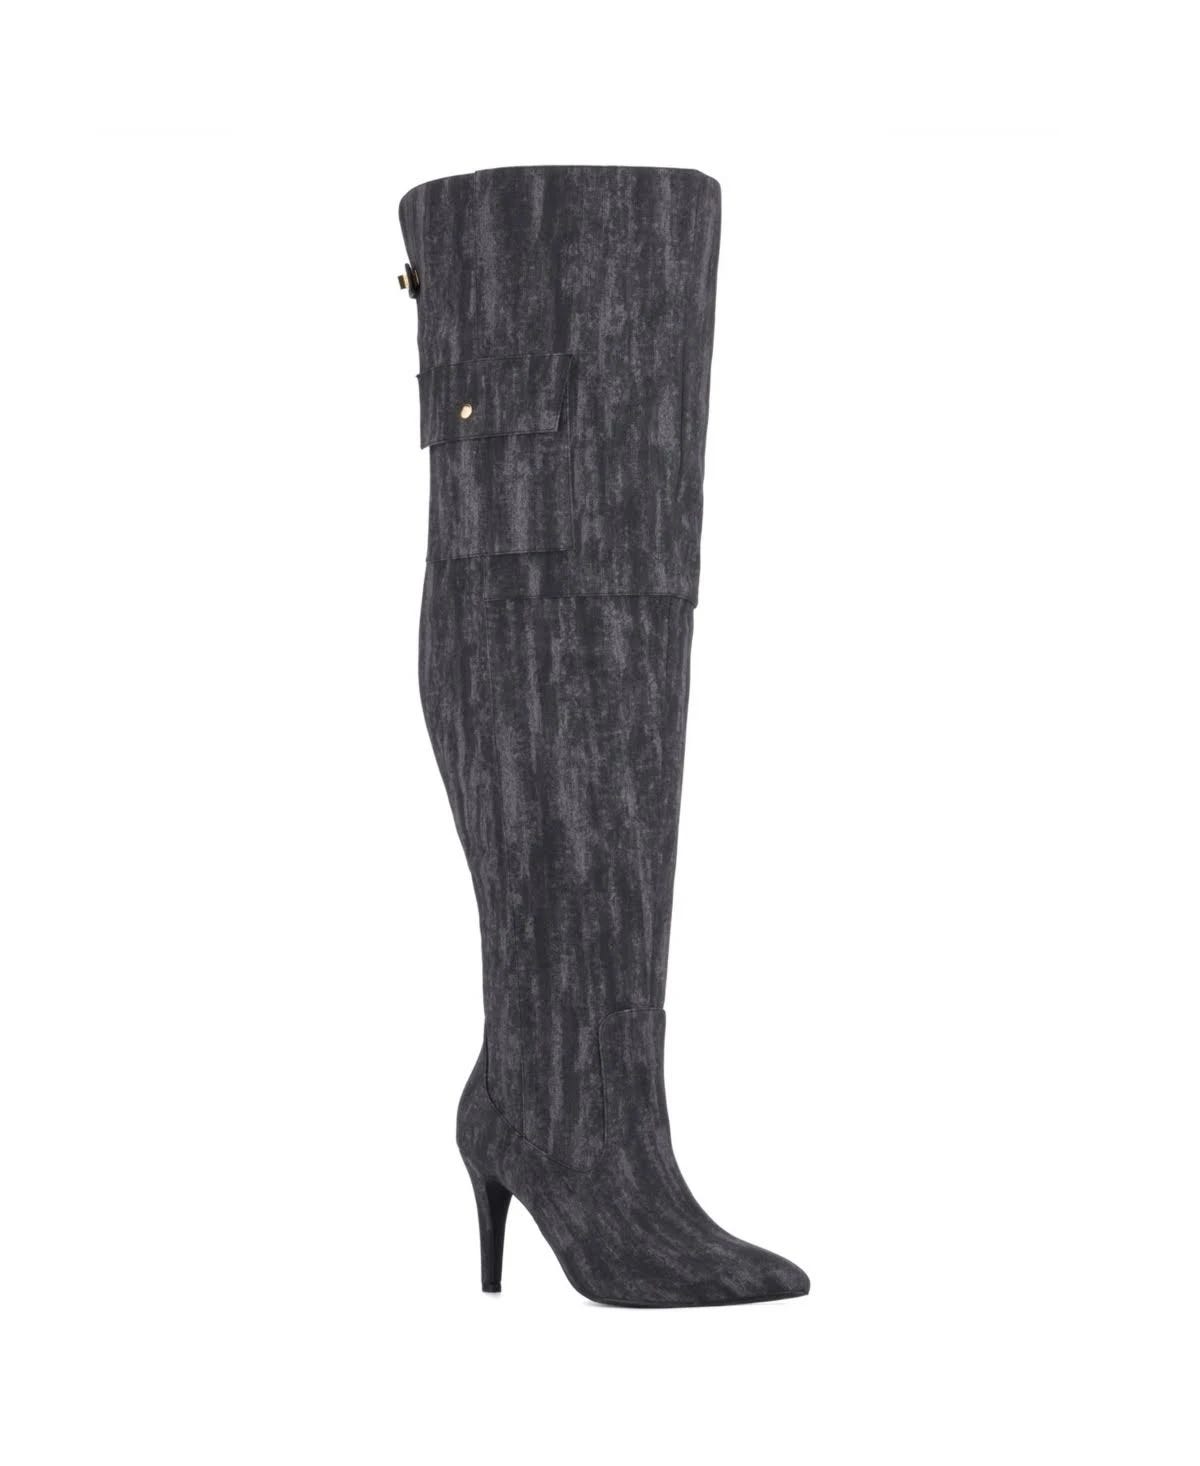 Women's Grey Knee-High Boots with Pointy Toe and Side Pocket | Image